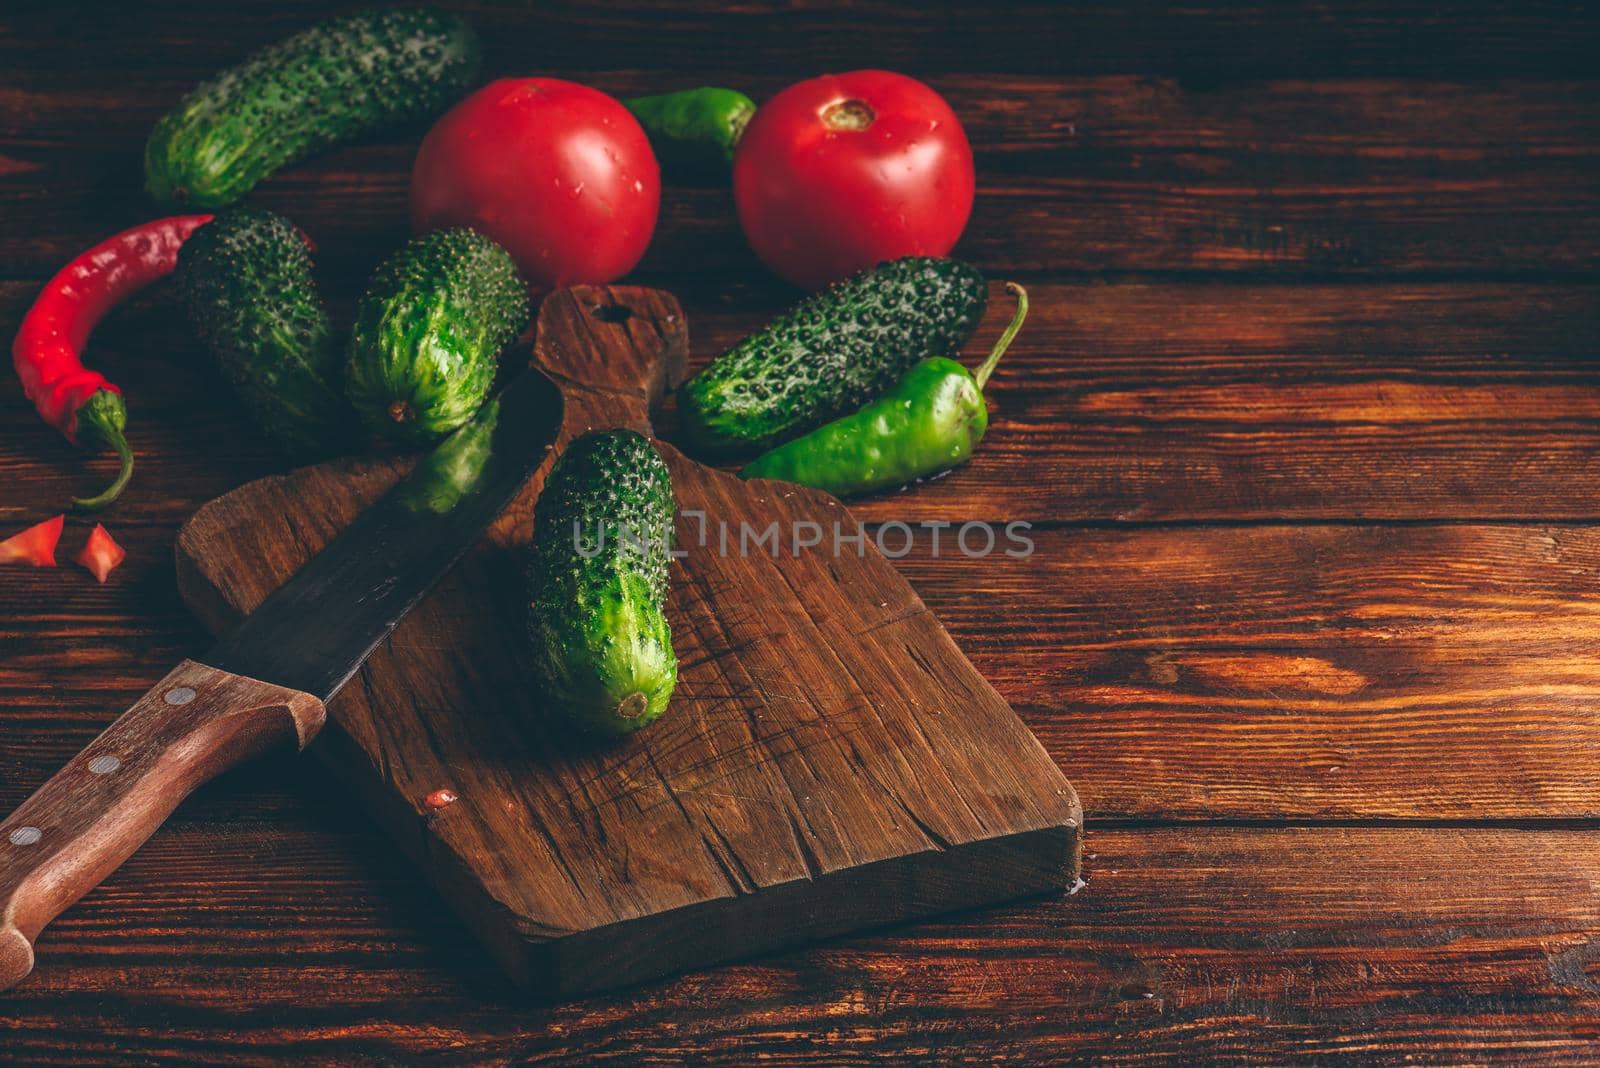 Cucumbers, tomatoes and chili peppers by Seva_blsv